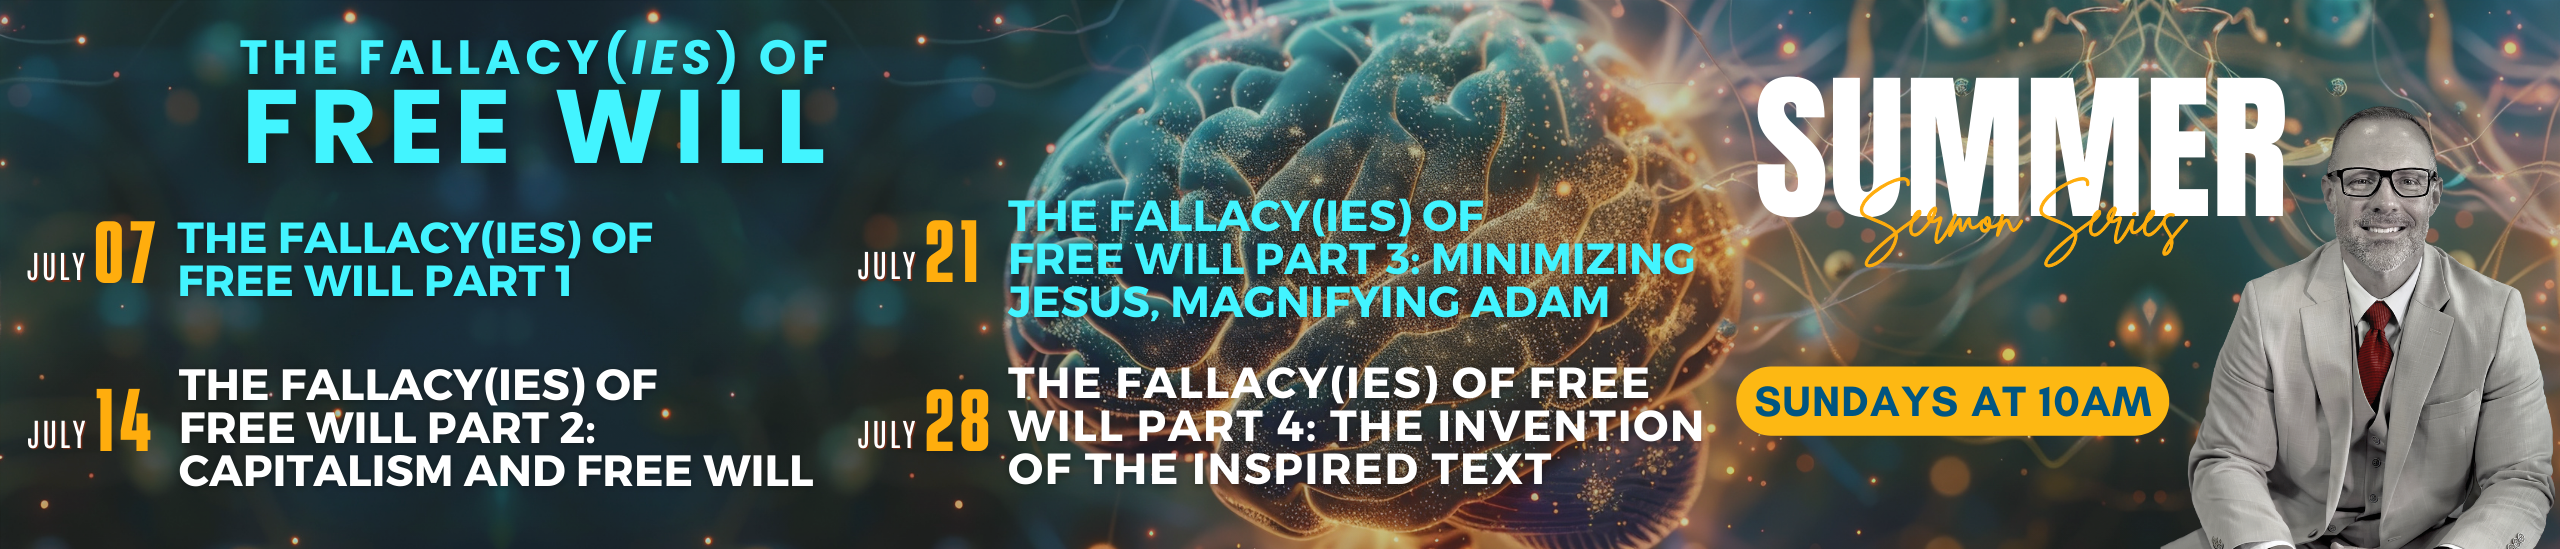 Summer Sermon Series - The Fallacy(ies) of Free Will